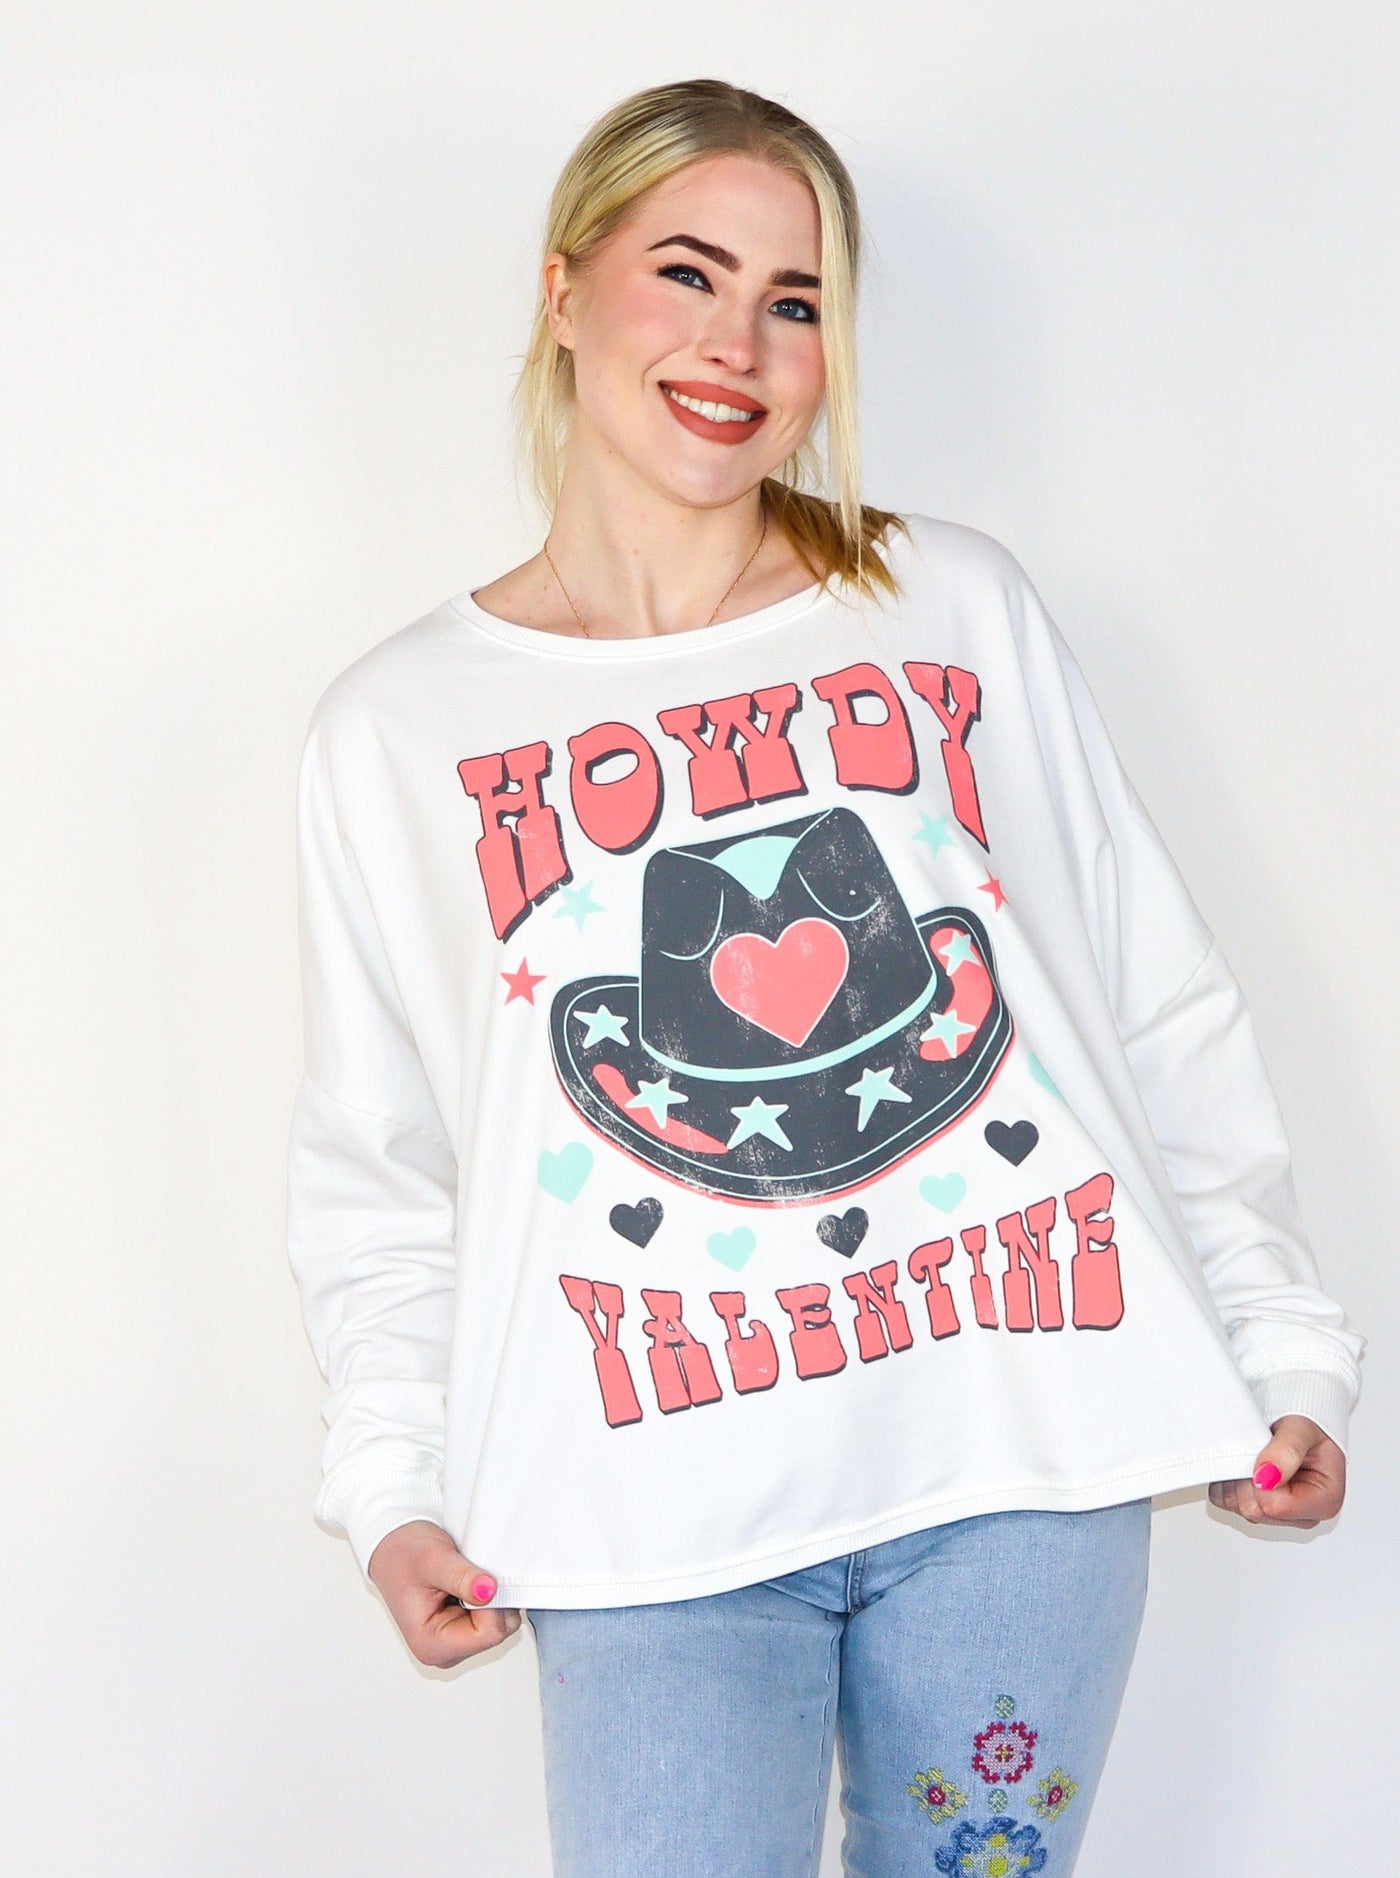 Model is wearing a white fleece sweatshirt that reads "Howdy Valentine" in a bold pink text with a large cowboy hat with pink, blue, and black star and heart details. Sweatshirt is paired with blue jeans. 